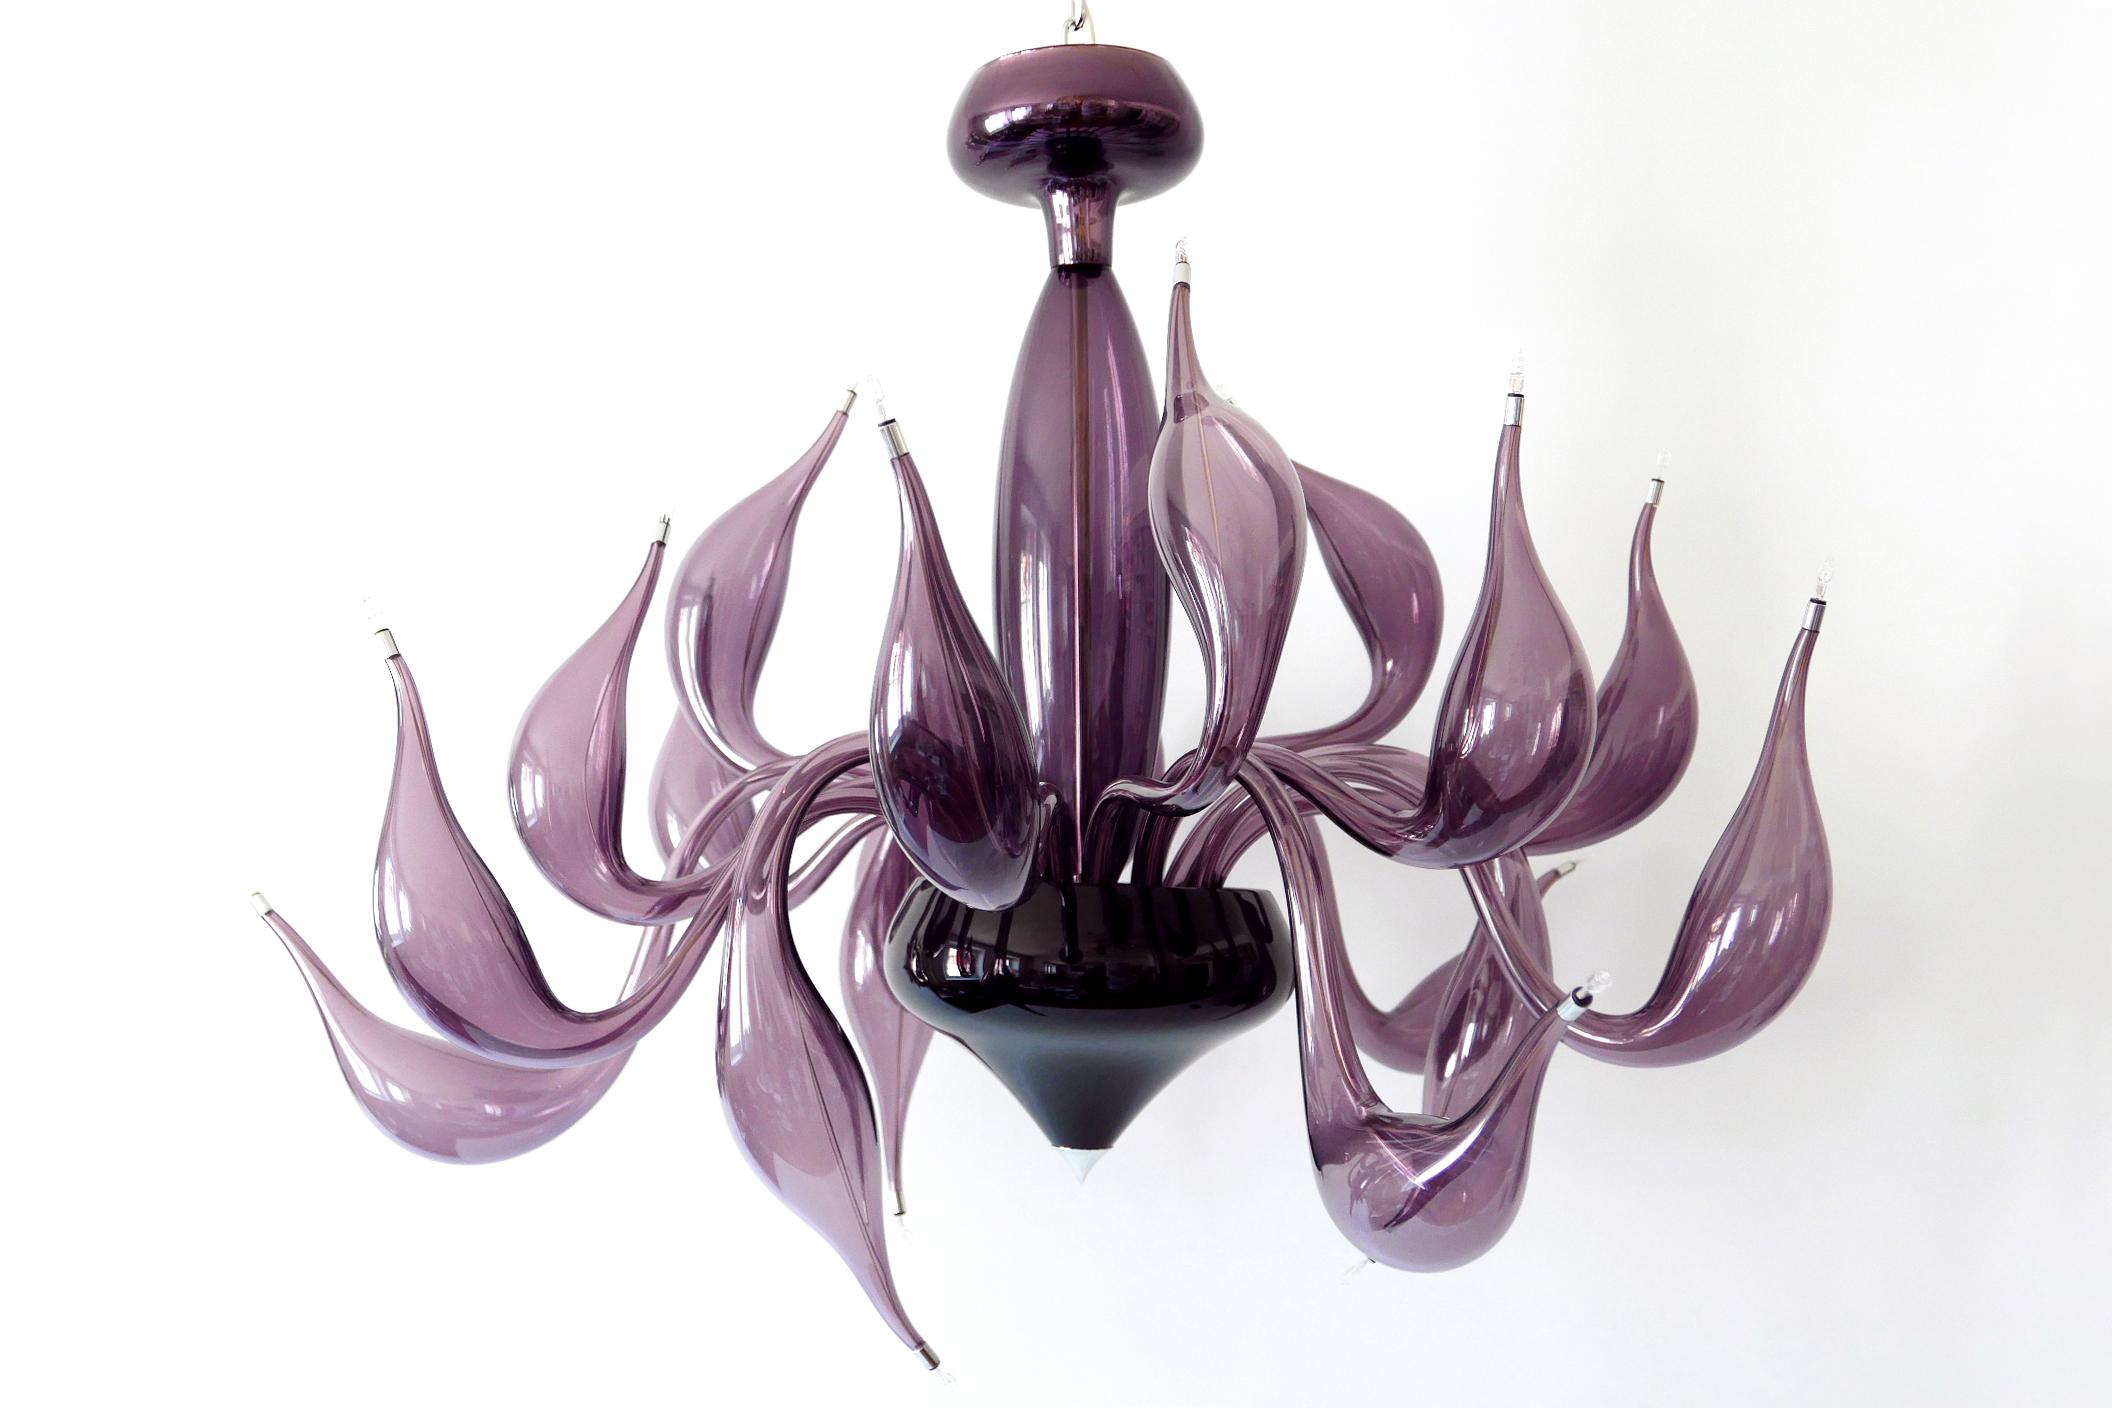 Sculptural Lu Murano Chandelier 18 Lights by Fabio Fornasier, 2004, Italy In Good Condition For Sale In Munich, DE